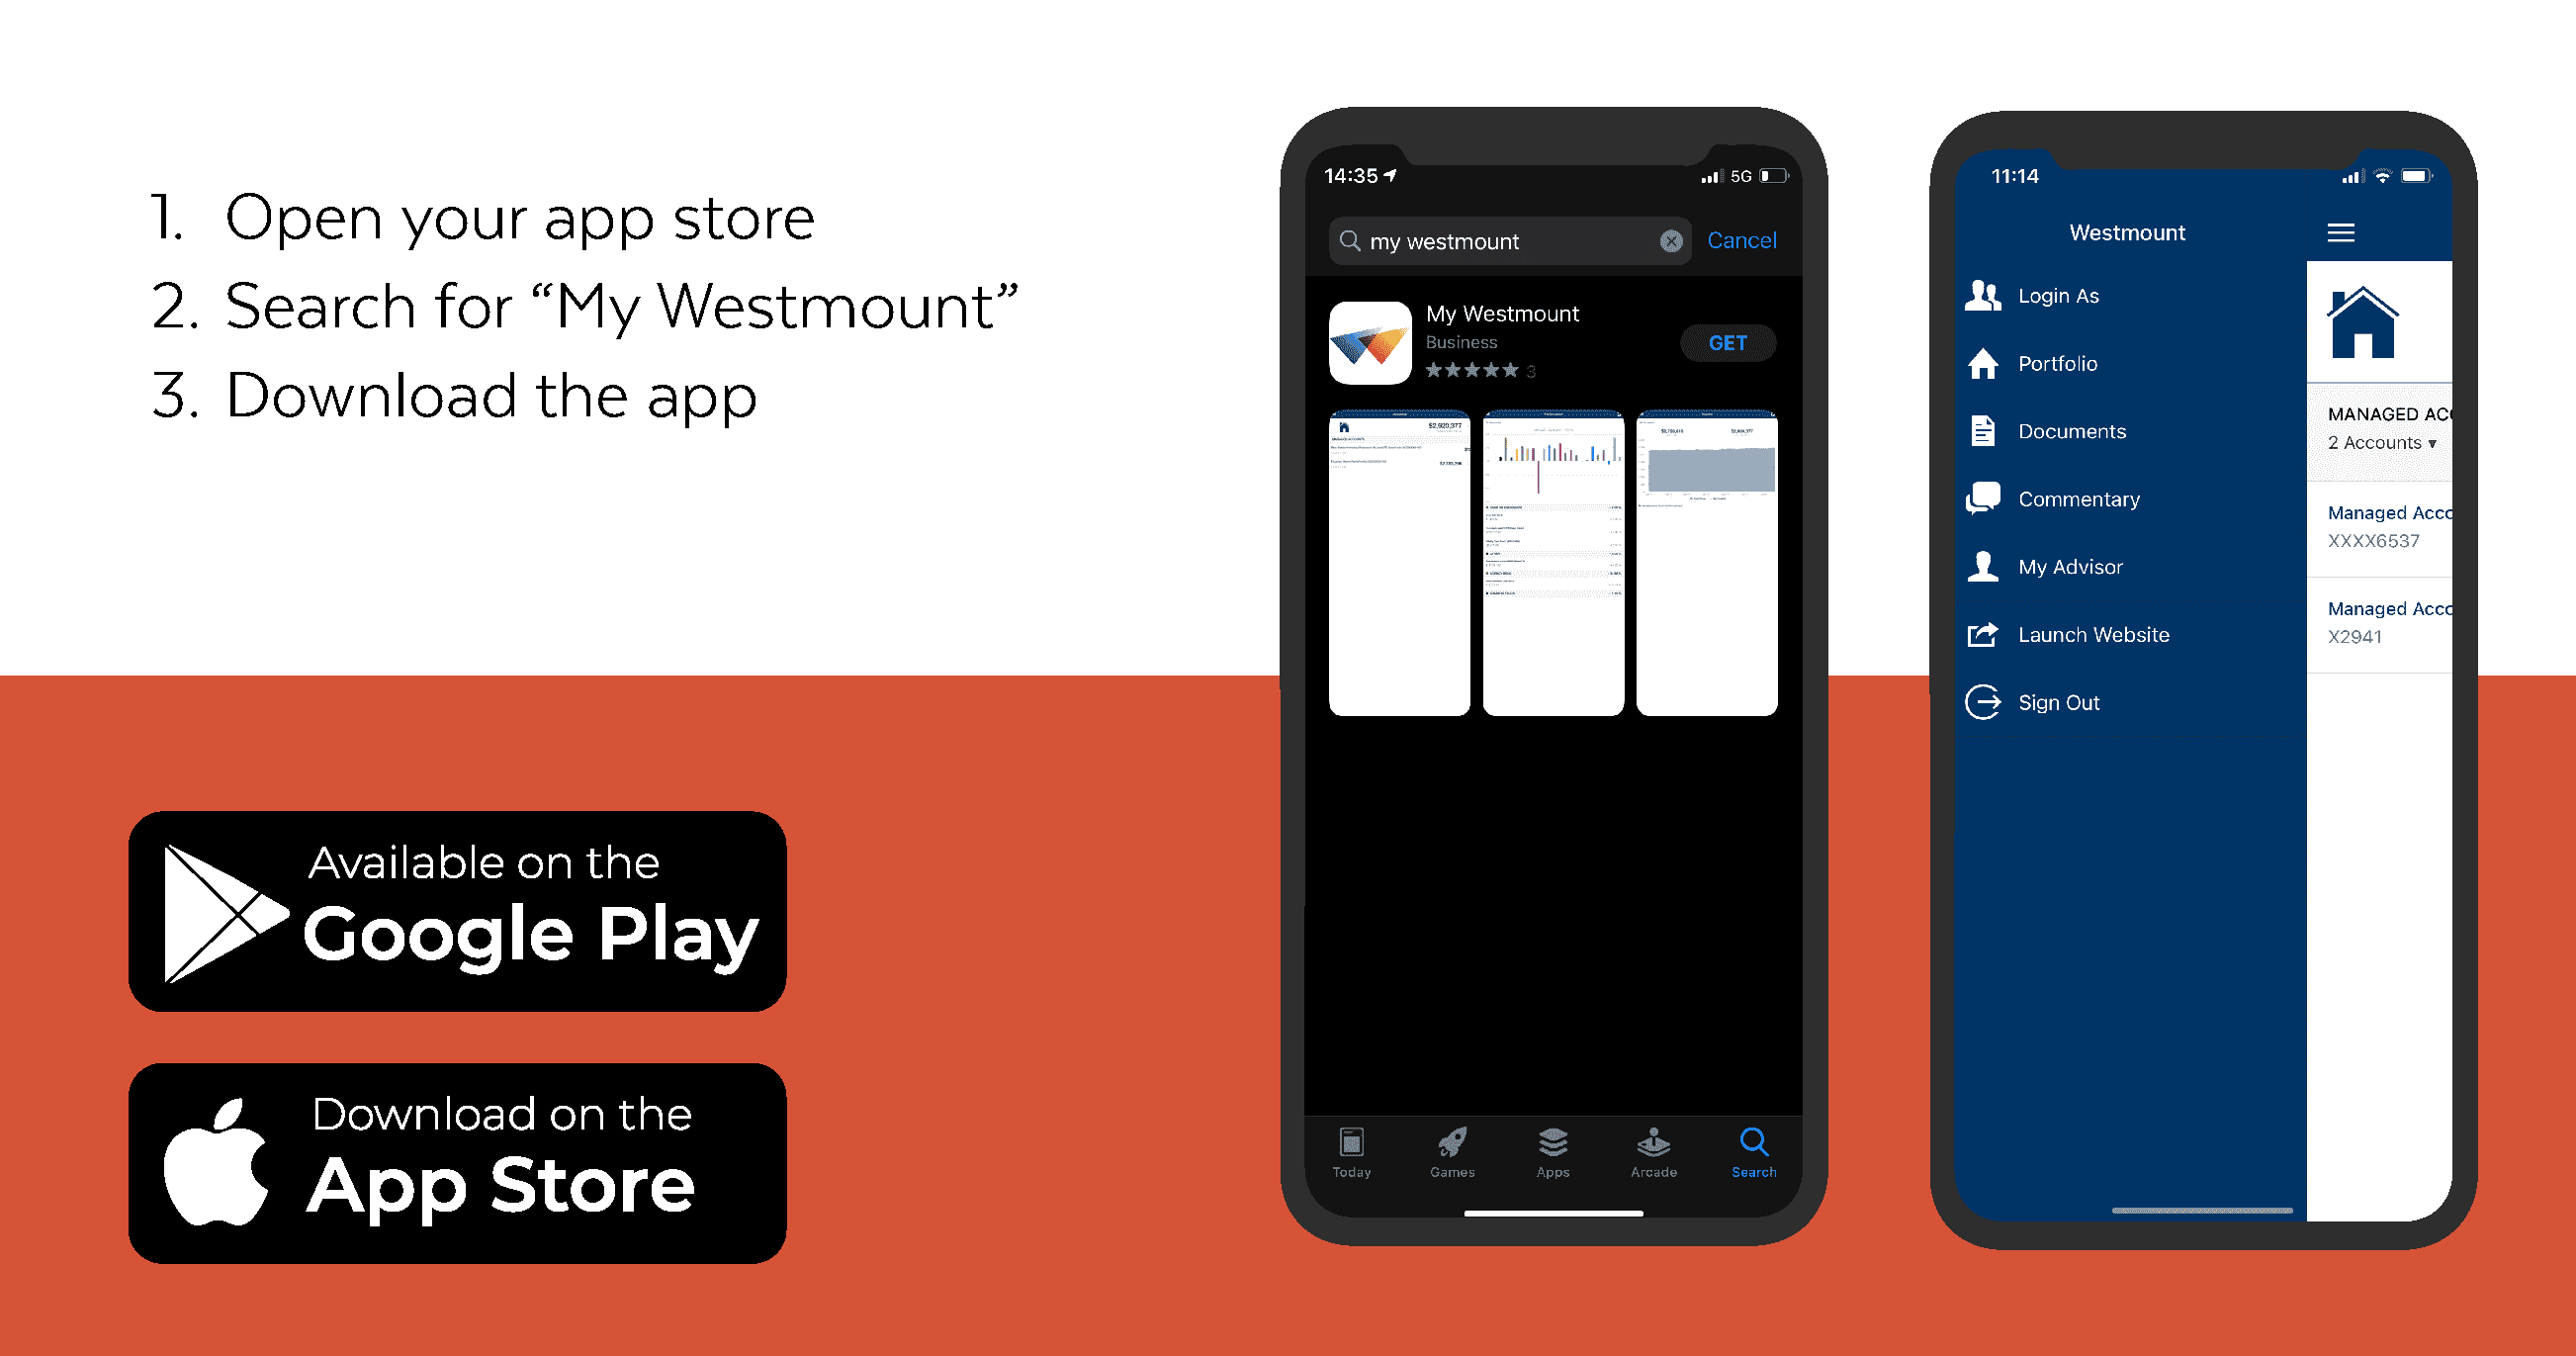 My Westmount screenshots for accessing the app